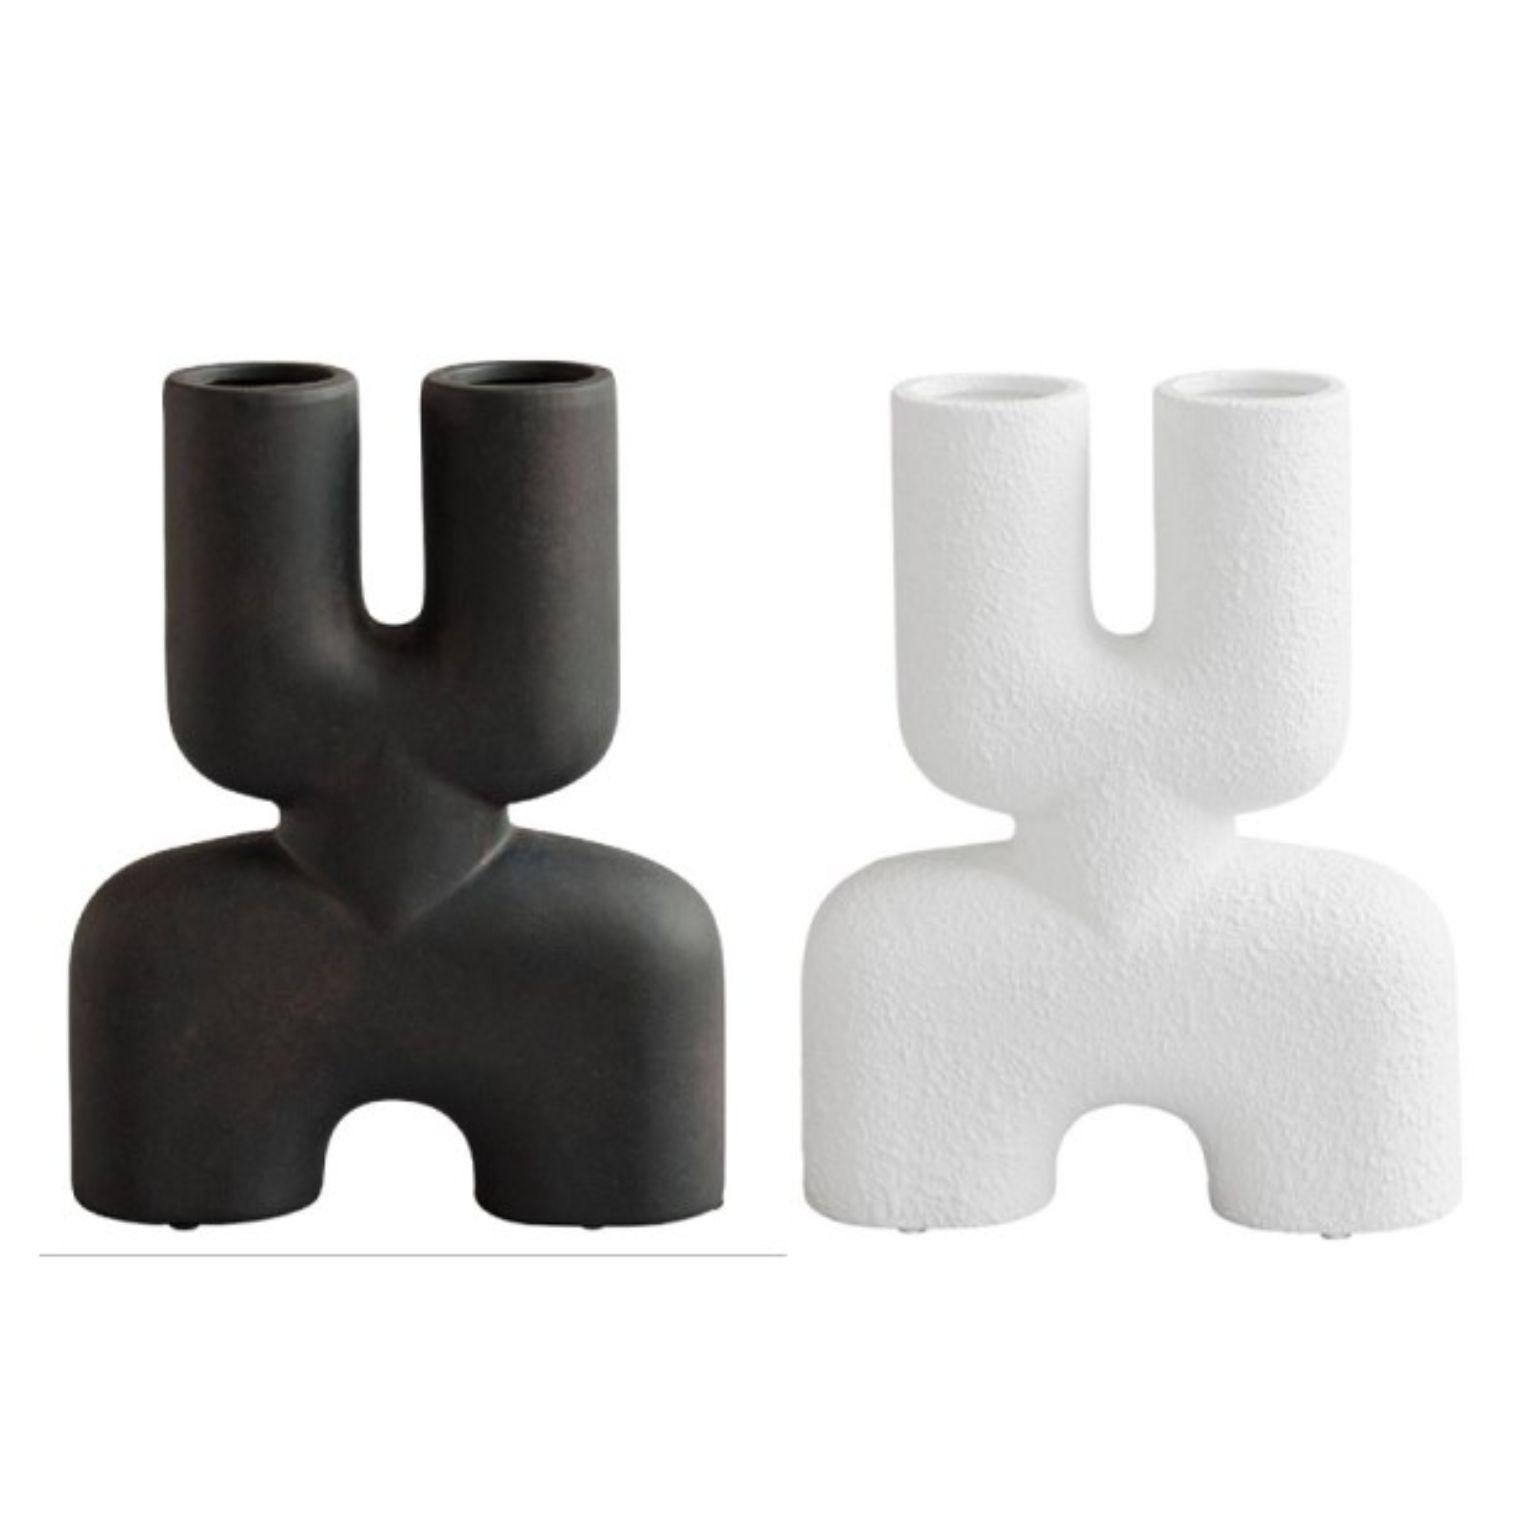 Set of 2 Cobra double mini by 101 Copenhagen
Designed by Kristian Sofus Hansen & Tommy Hyldahl
Dimensions: L 22 / W 6,5 / H 28 CM
Materials: Ceramic

A tribute to the Cobra Arts Movement of the 1960s, the collection is the epitome of quirky